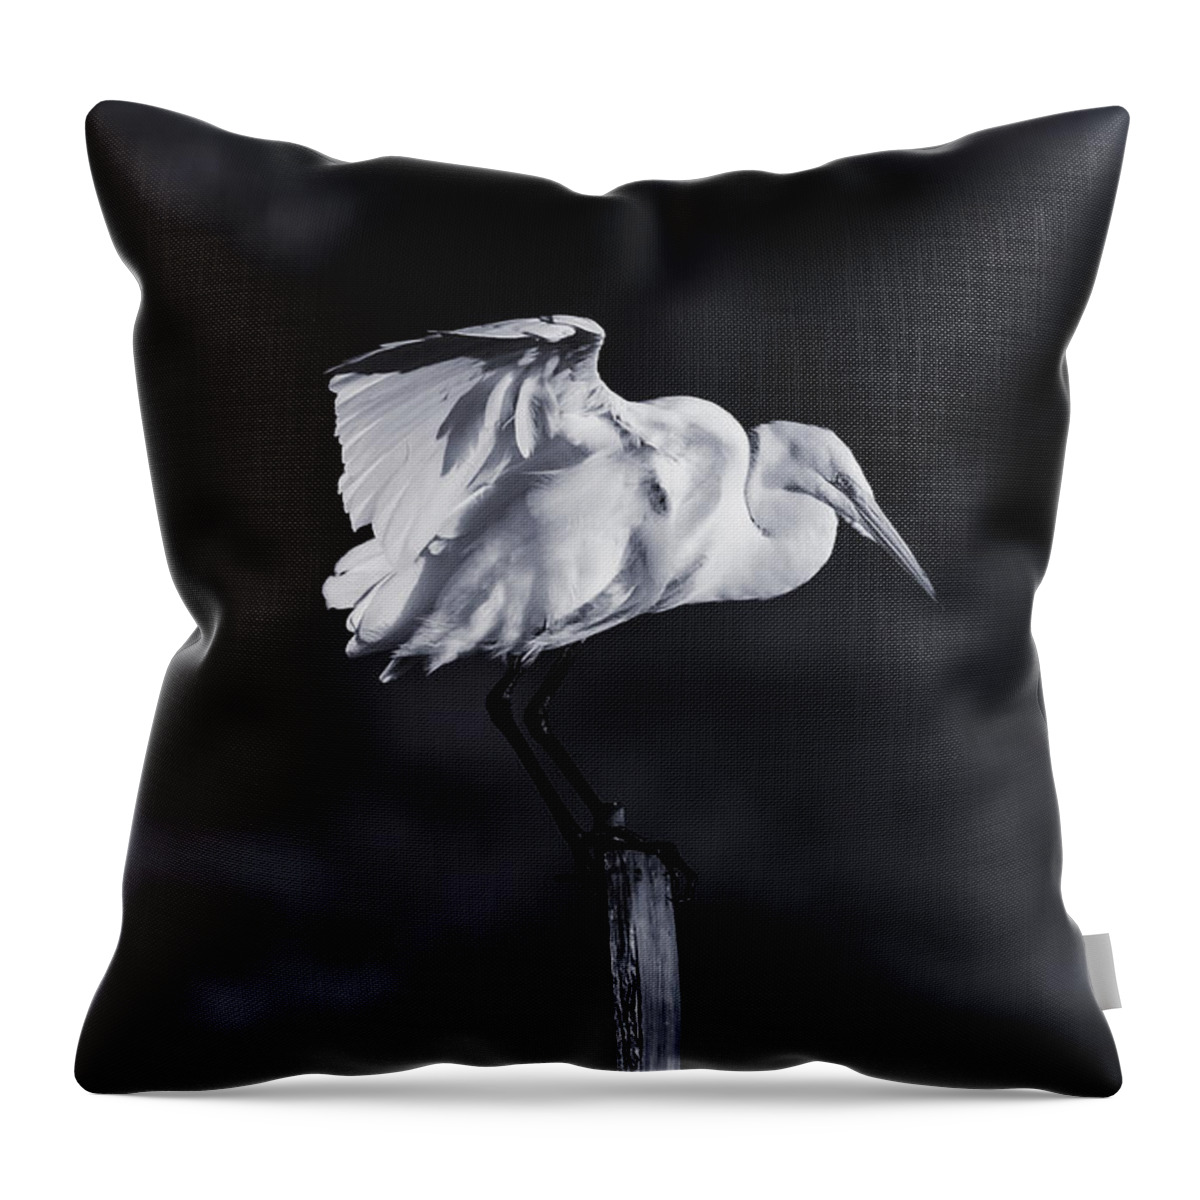 Central California Coast Throw Pillow featuring the photograph Stands Alone by Bill Roberts